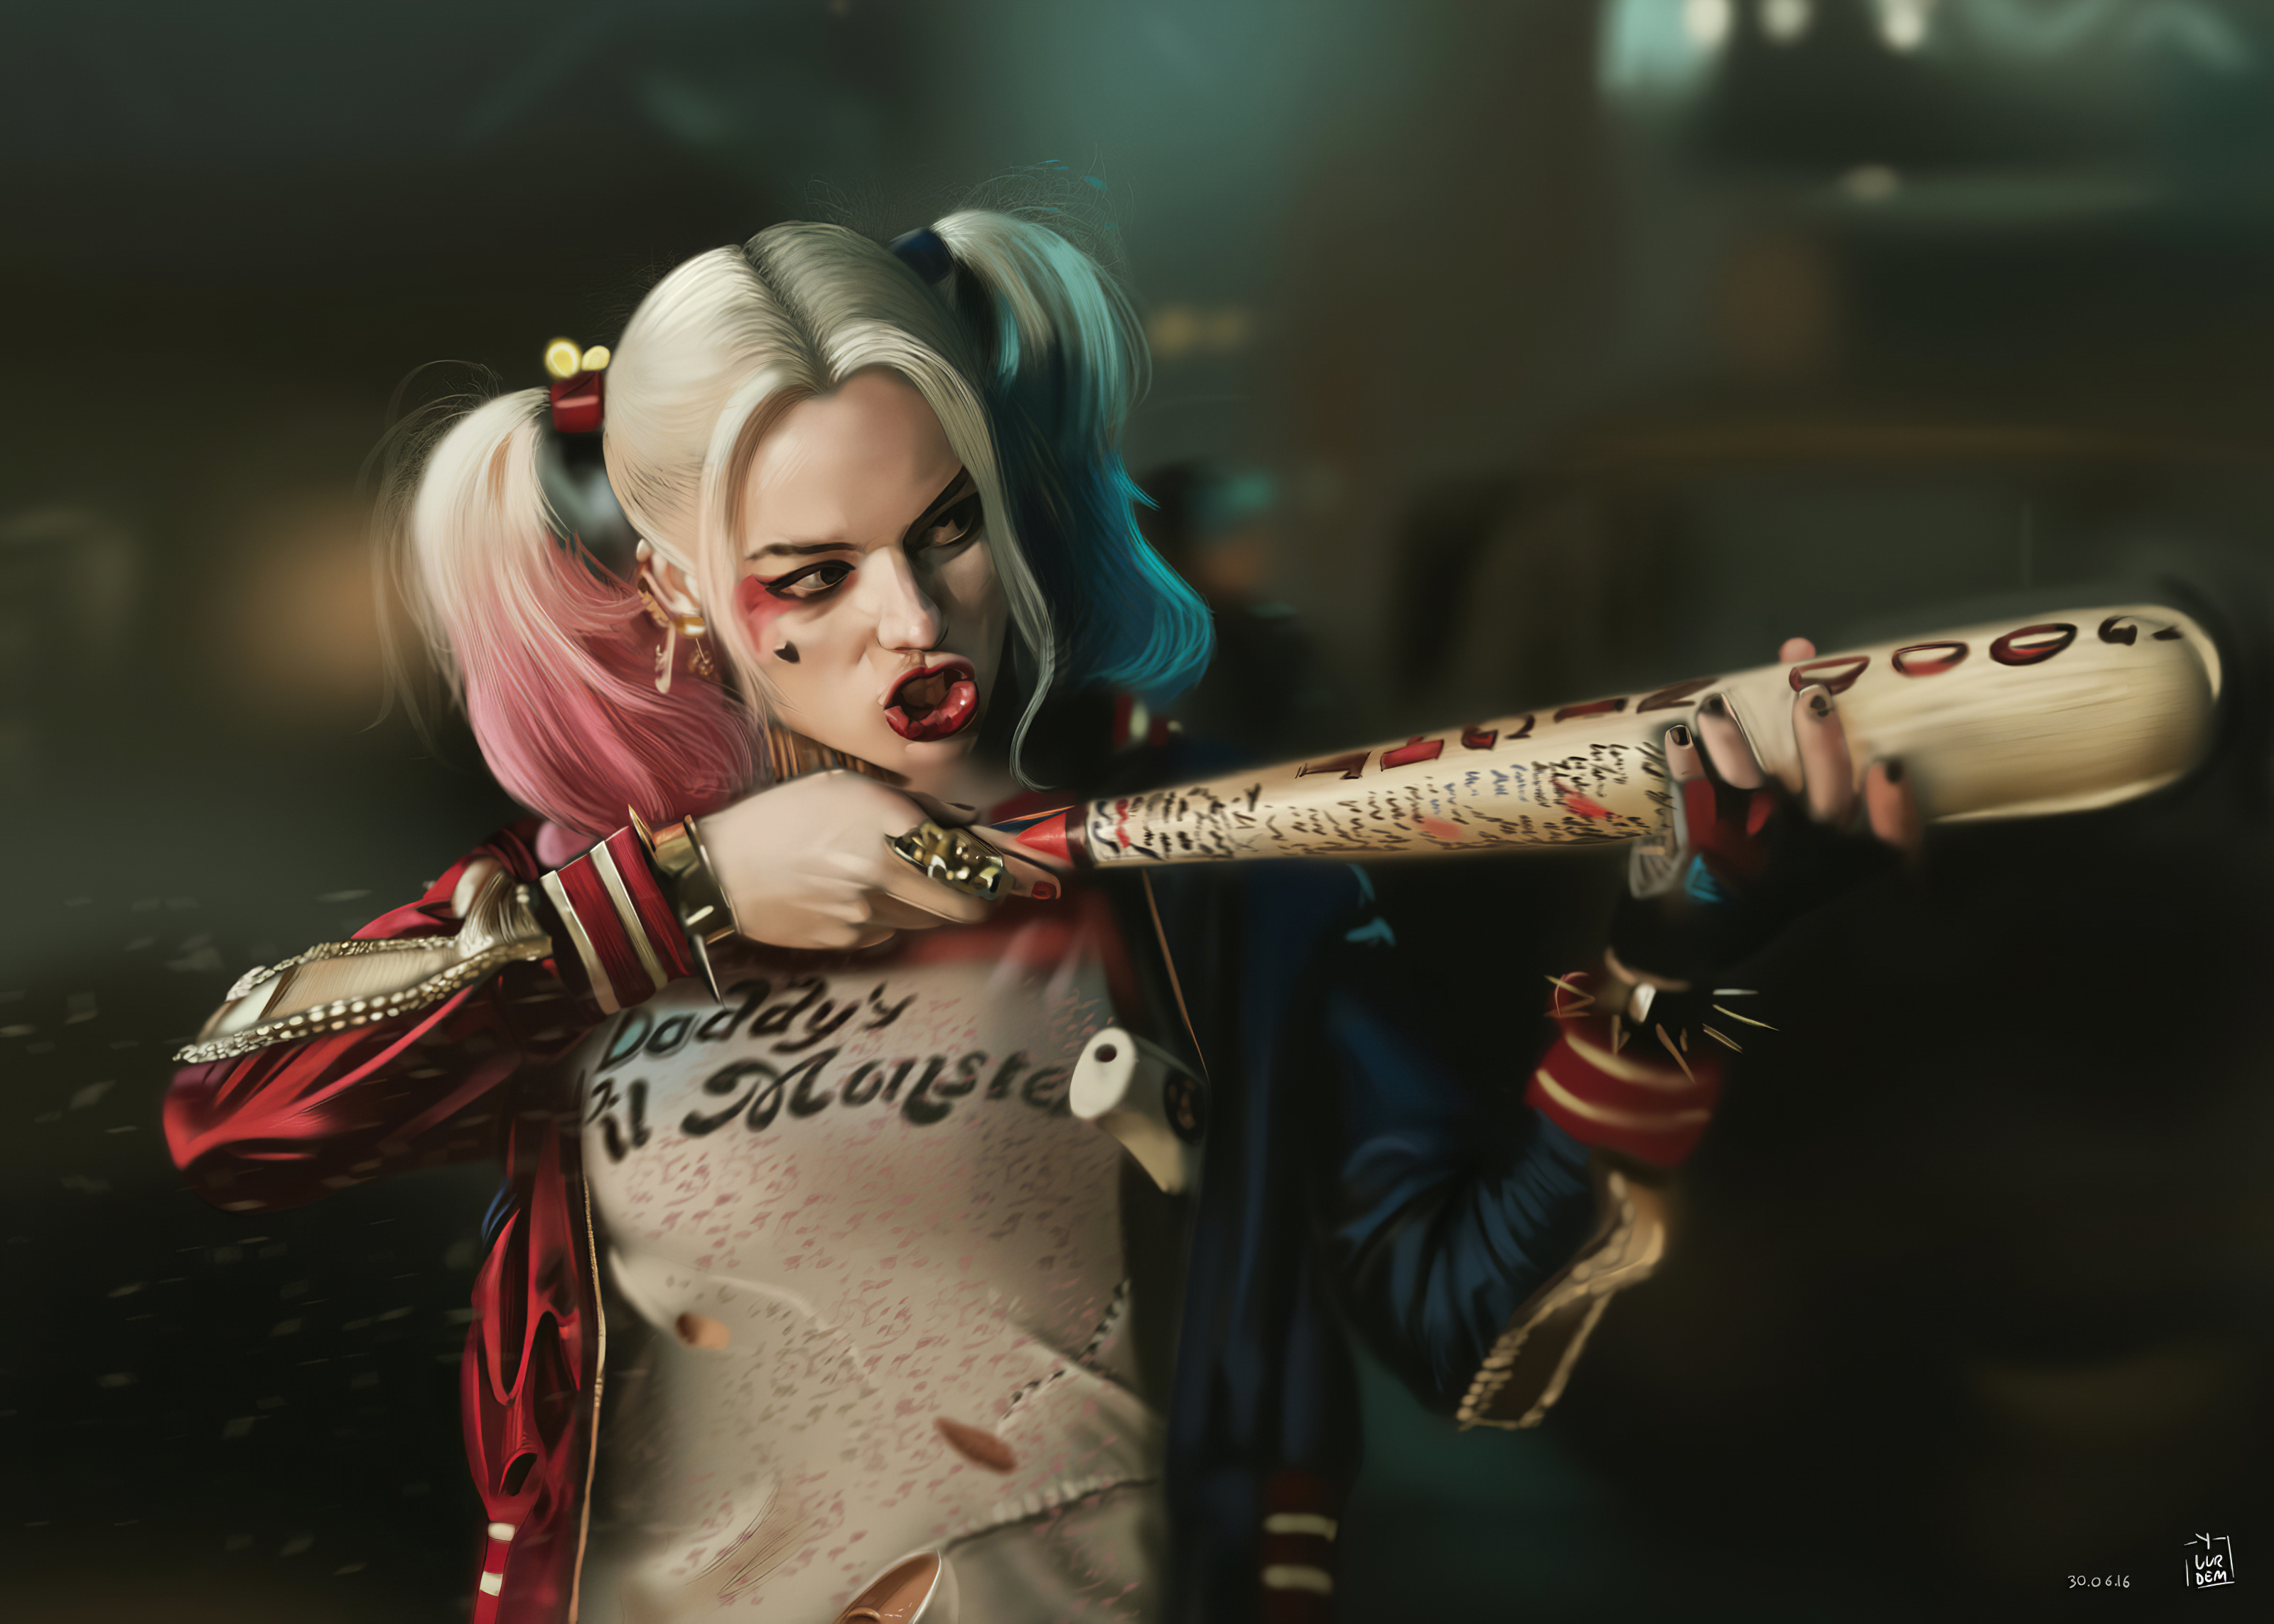 Free HD face, movie, white hair, harley quinn, suicide squad, dc comics, margot robbie, twintails, two toned hair